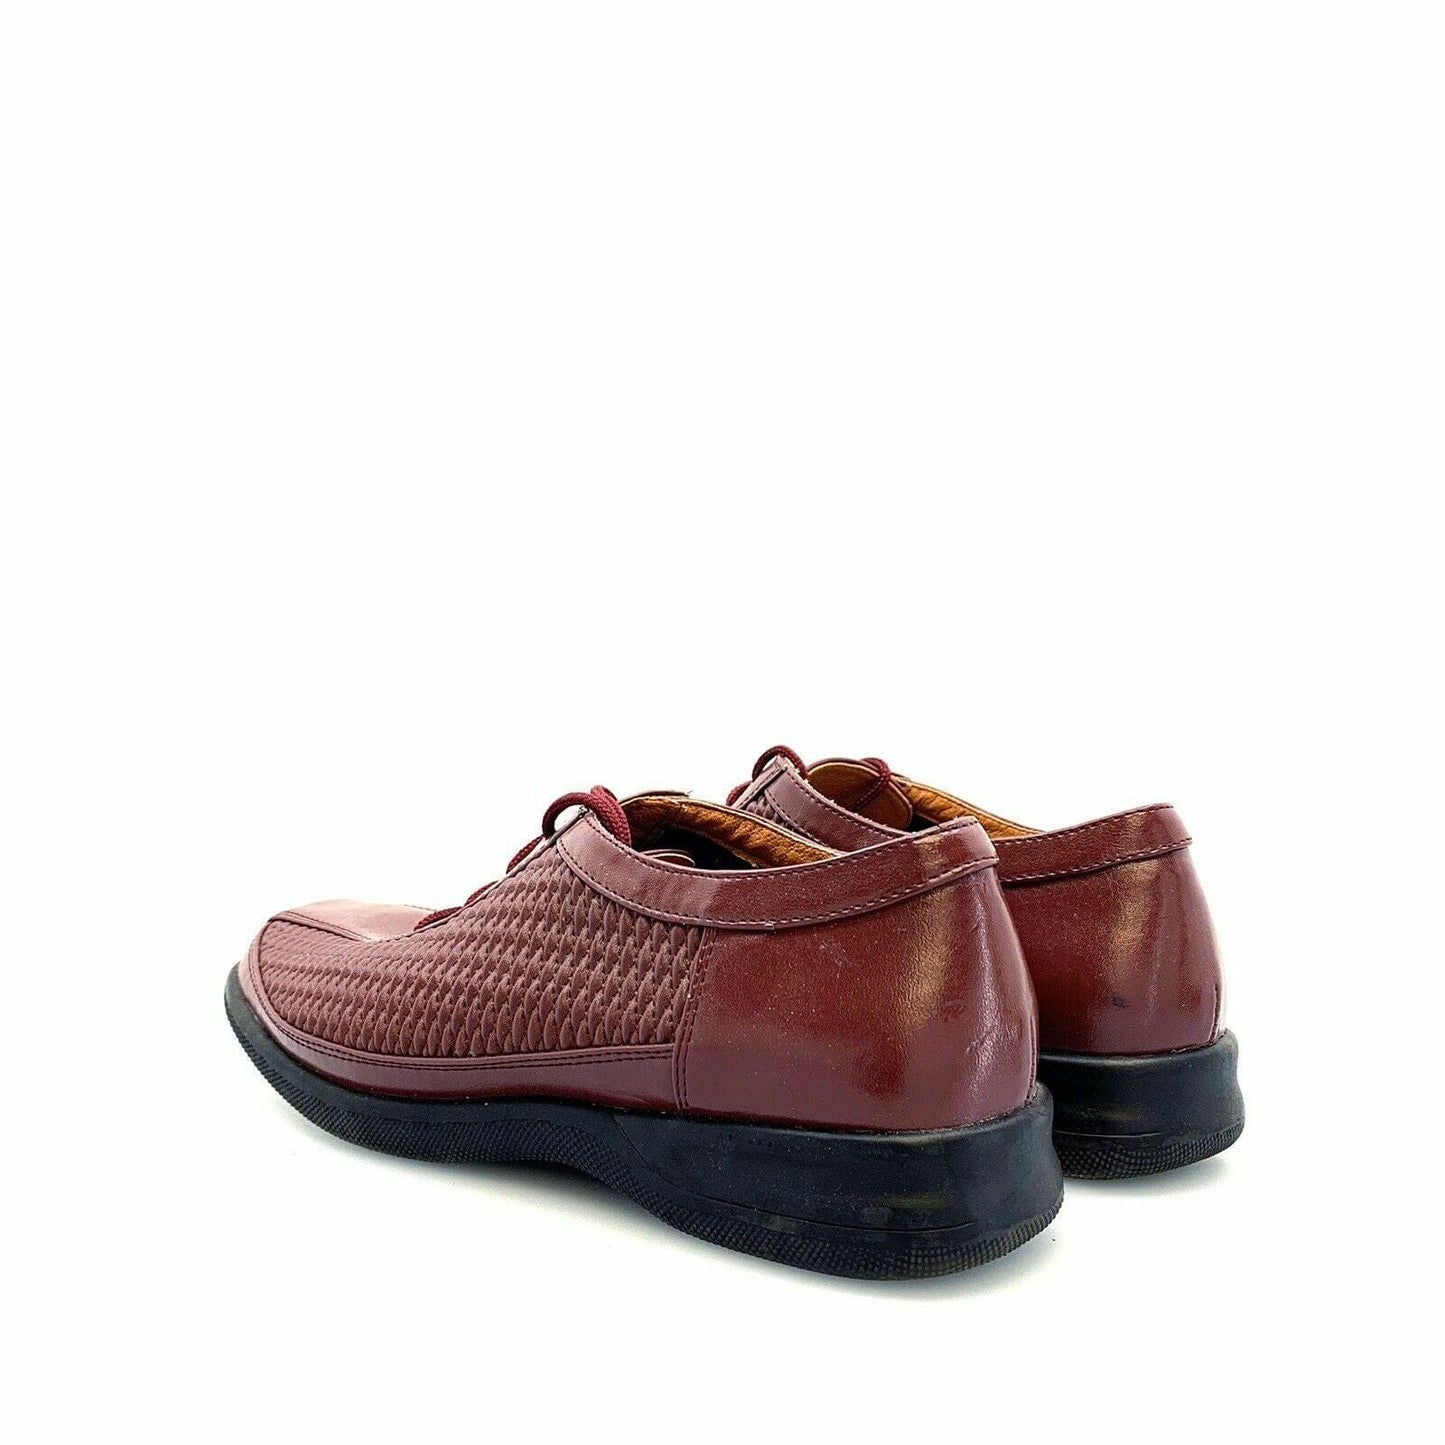 Beacon Euro-Flex Womens Comfort Lace-Up Casual Loafers Shoes, Brown - Size 8M